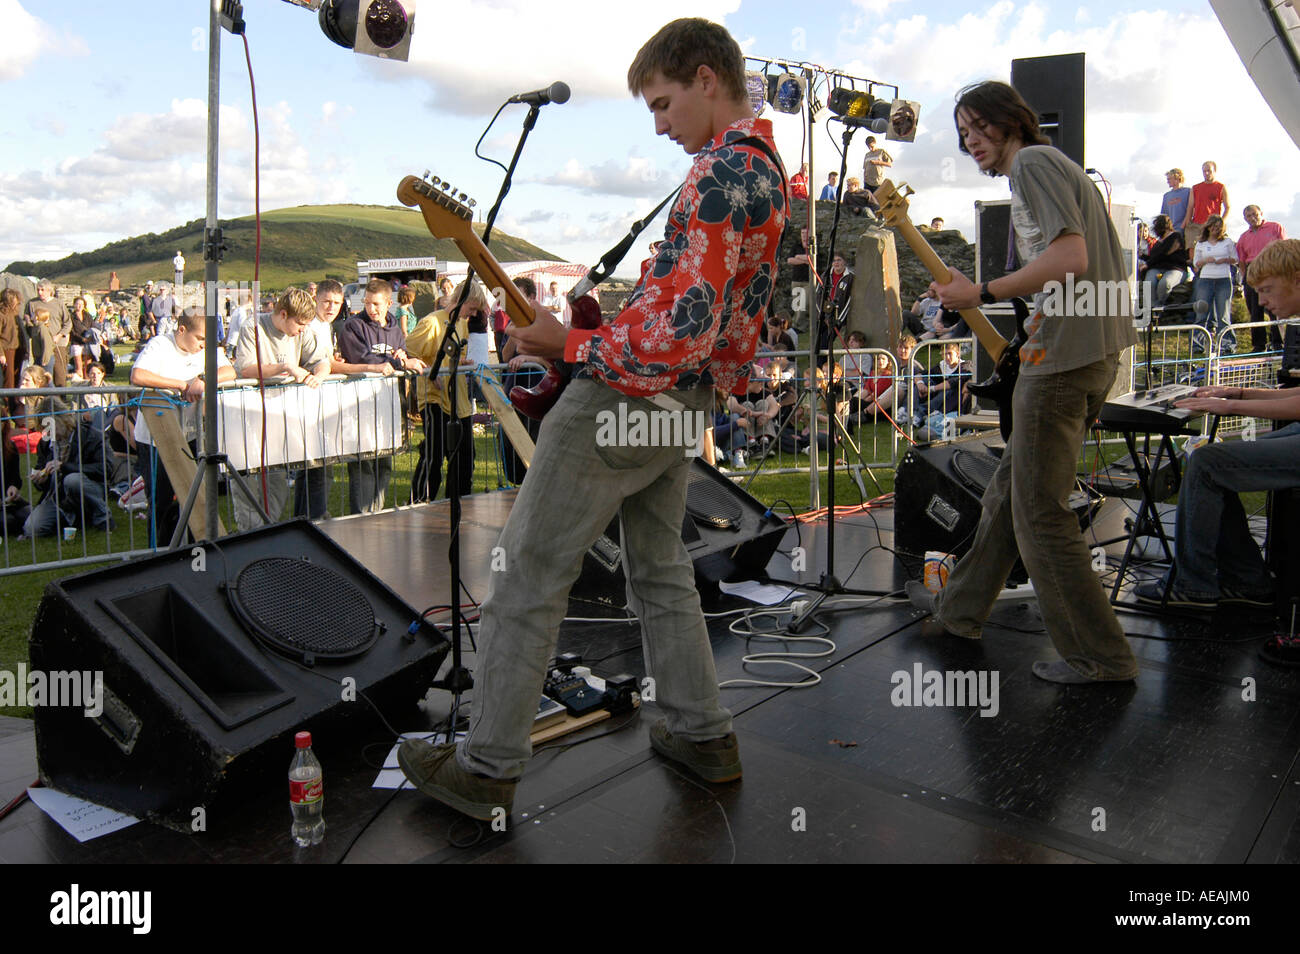 The Poppies pop group playing at Castle Rock annual outdoor music festival Aberystwyth Wales UK Stock Photo